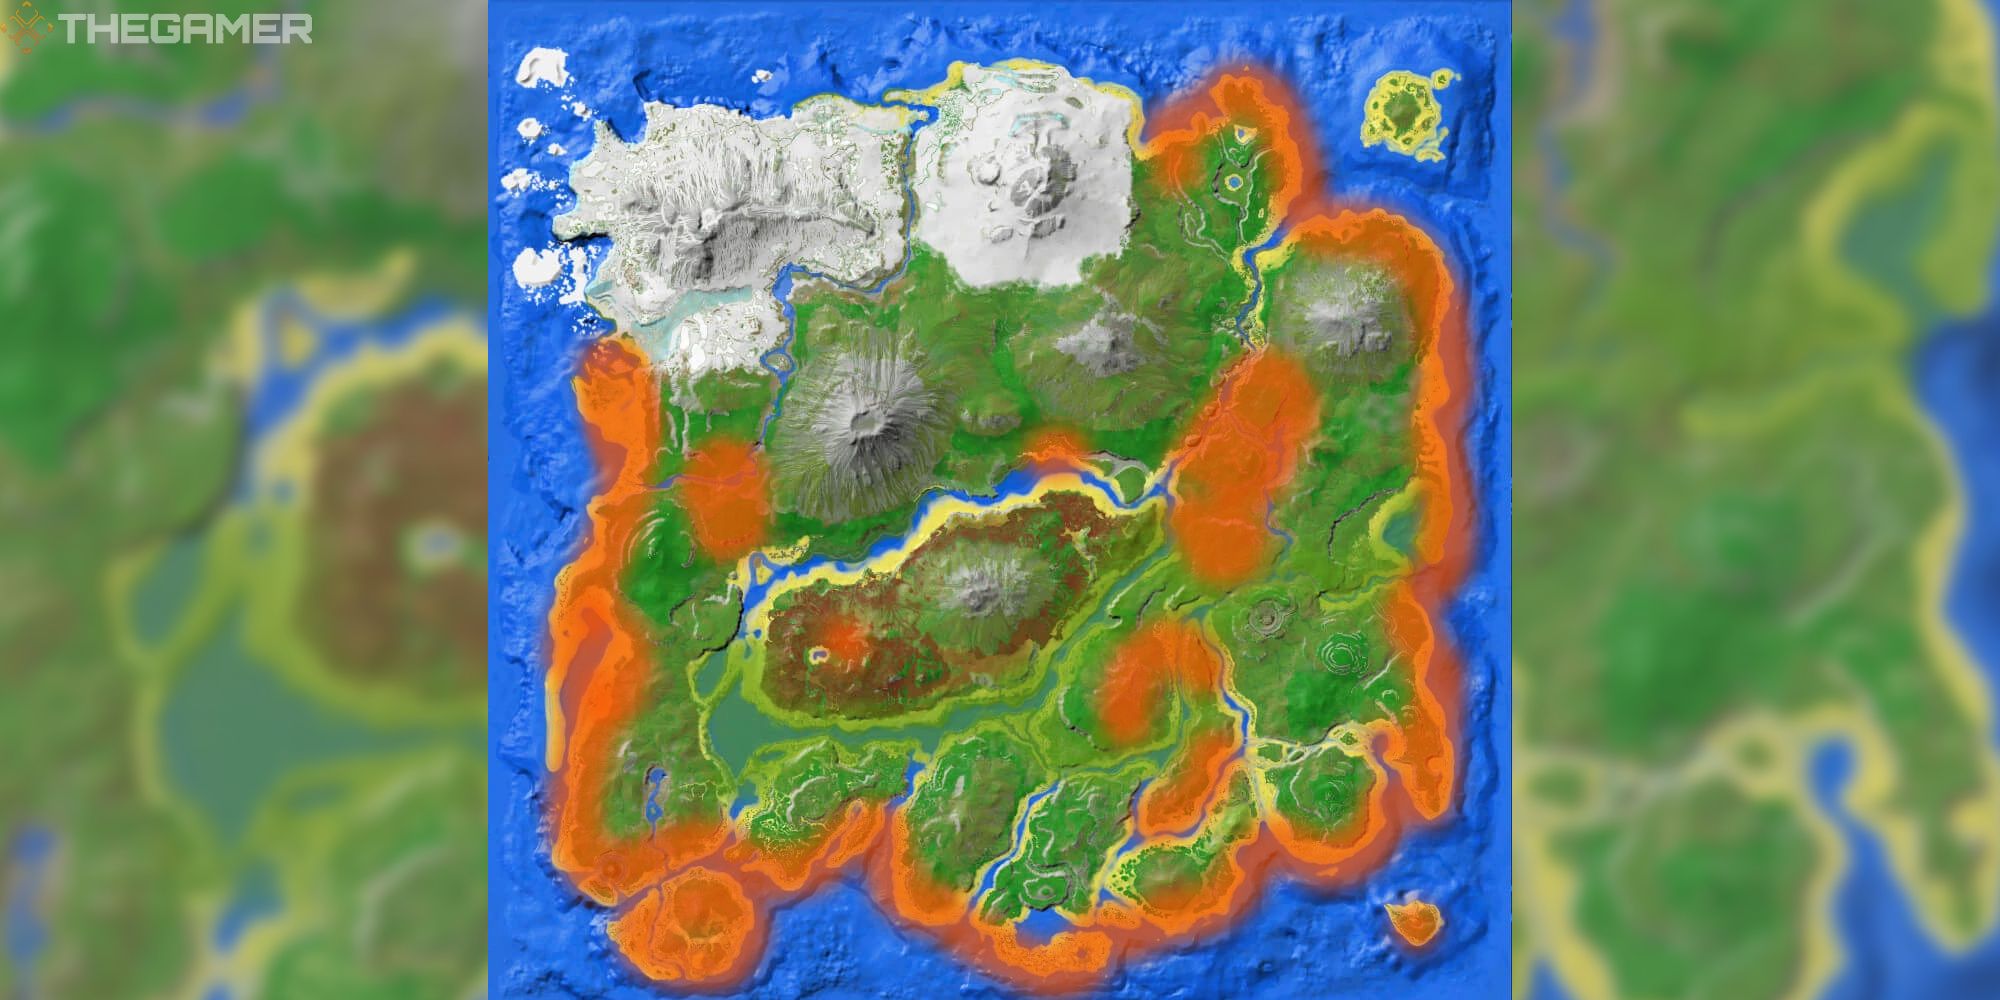 island map with bronto locations in orange